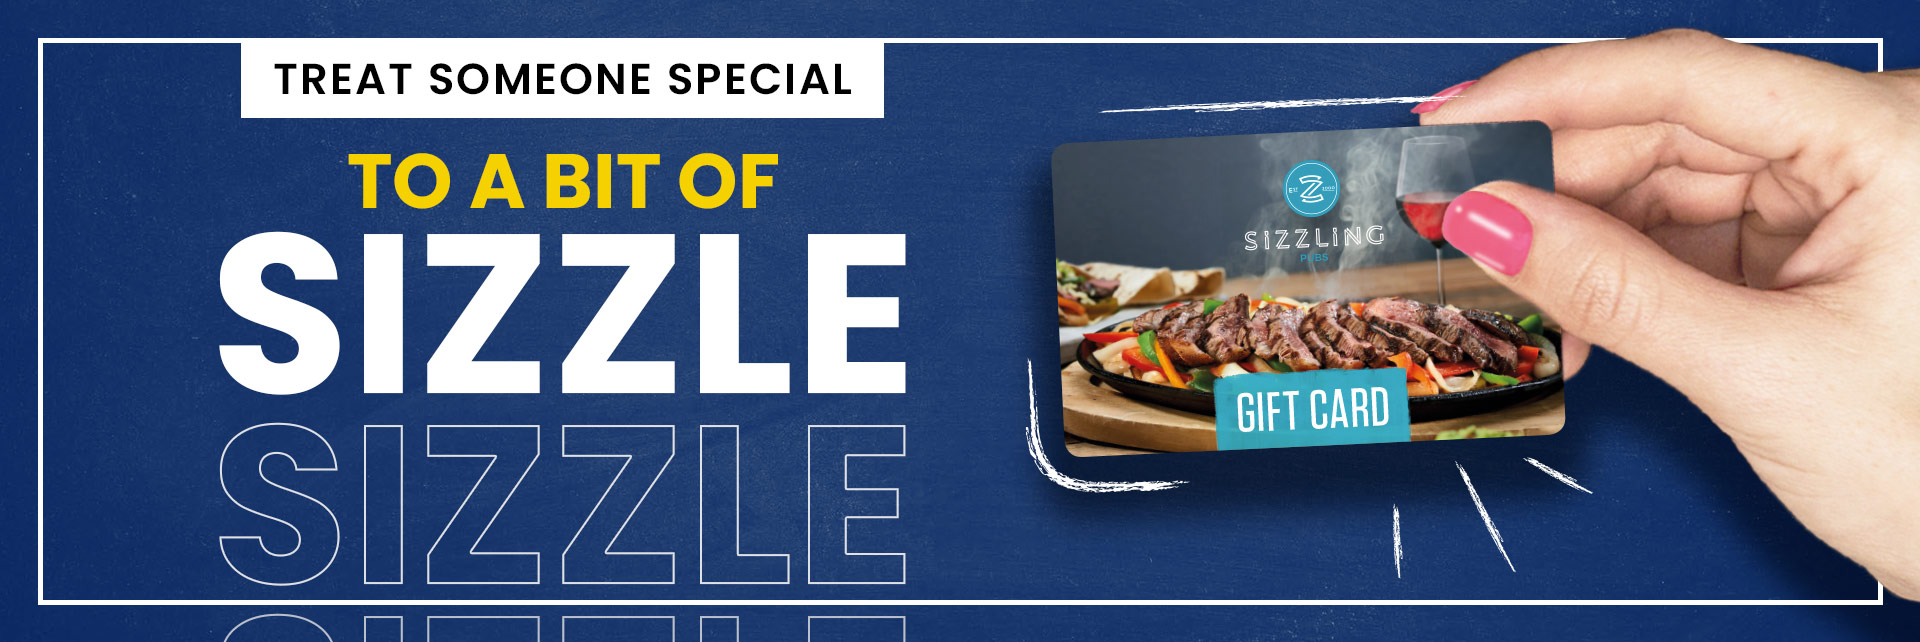 Sizzling Pubs Gift Card at The Iford Bridge in Bournemouth